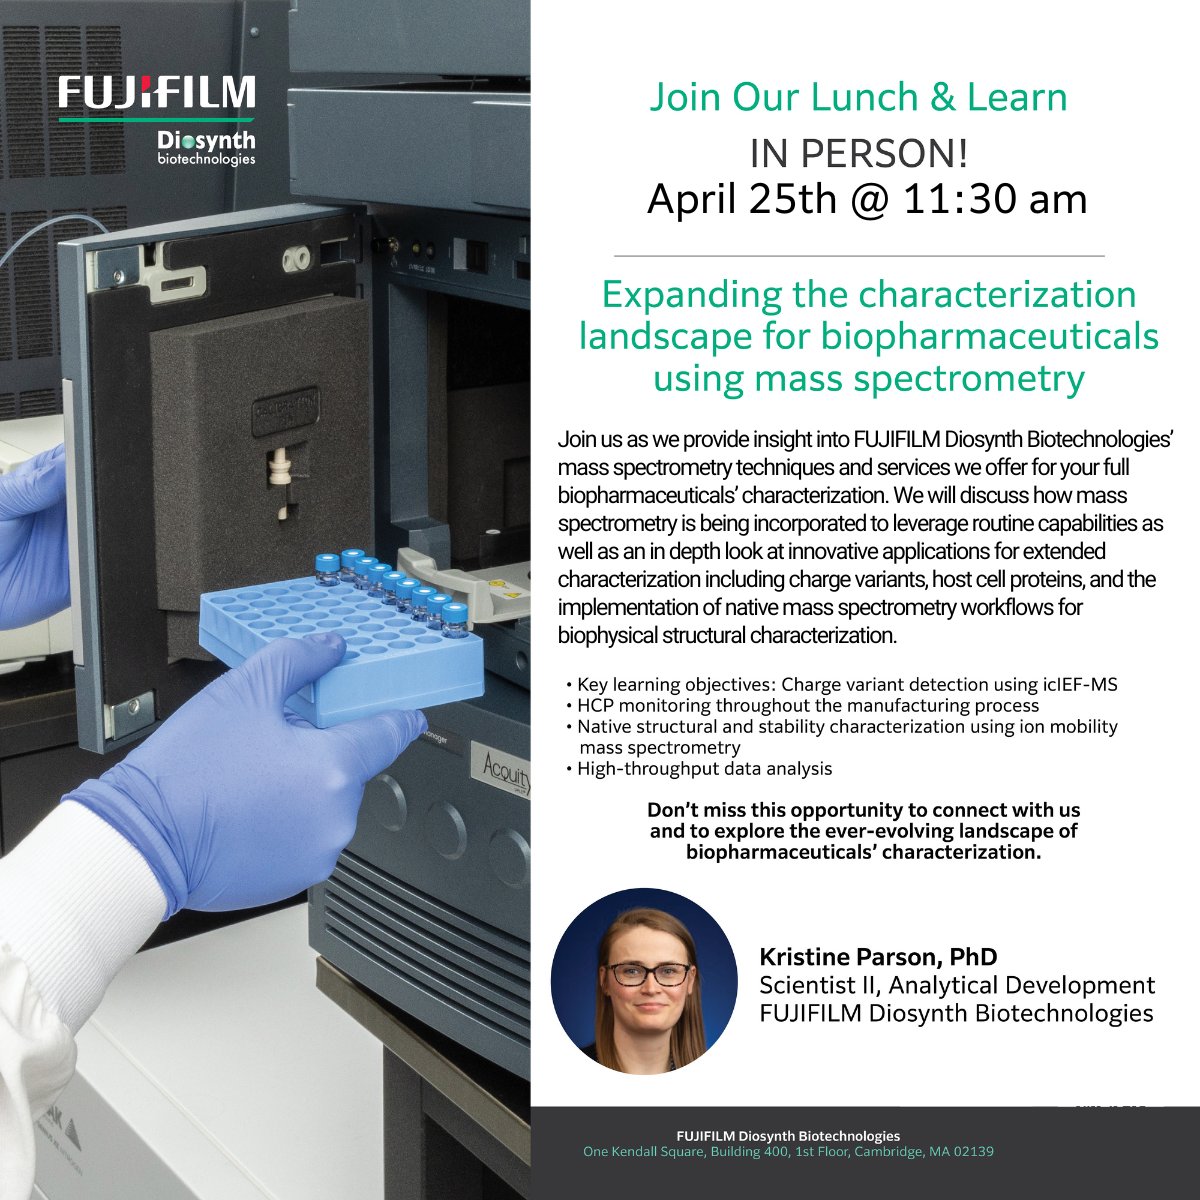 🔬 Join us IN PERSON on April 25th, 2024, at 11:30 am EST for a LUNCH & LEARN session in Cambridge, MA! Learn about our cutting-edge mass spectrometry techniques and services for comprehensive biopharmaceutical characterization. app.tickettailor.com/events/fujifil…